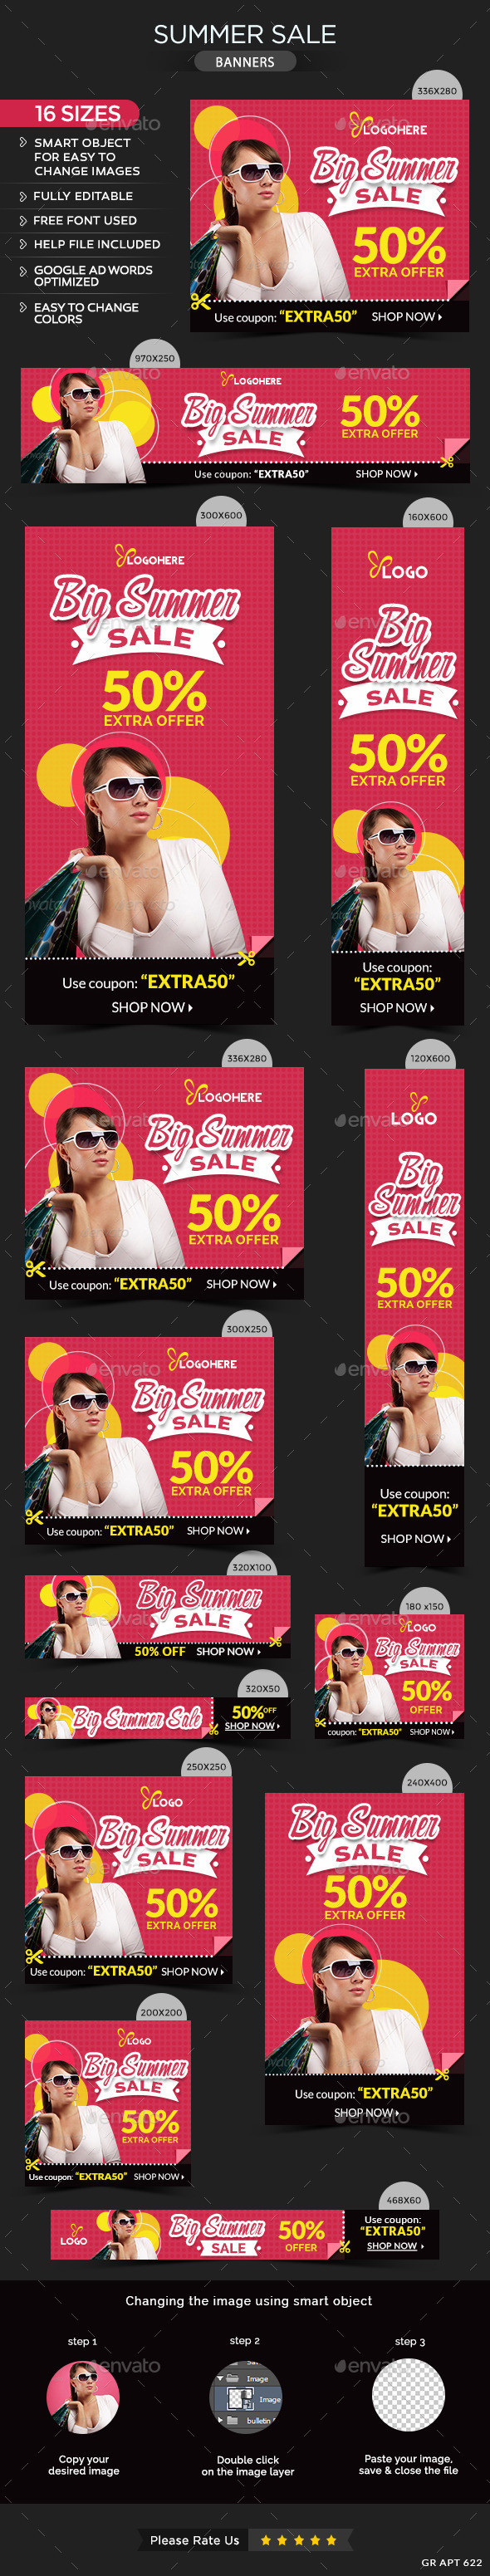 Apt 622 big 20summer 20sale 20banners preview